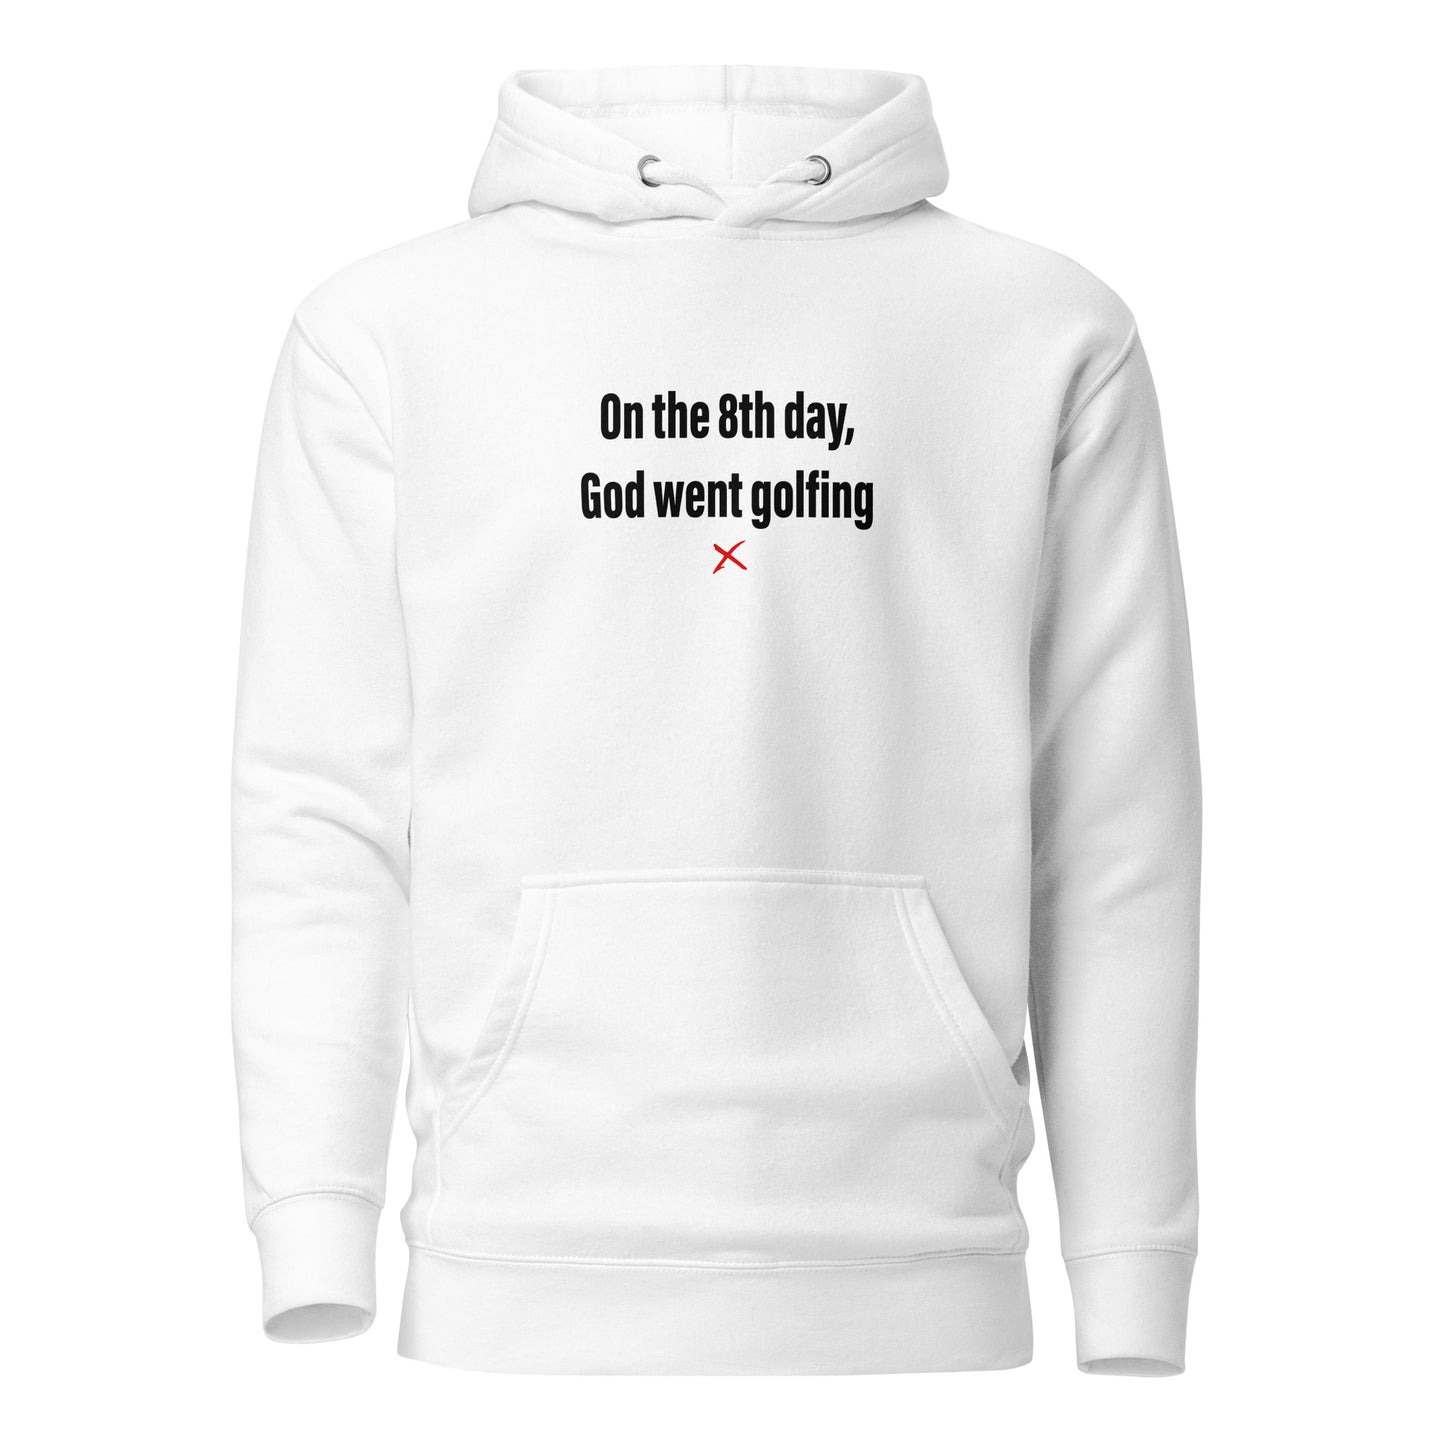 On the 8th day, God went golfing - Hoodie